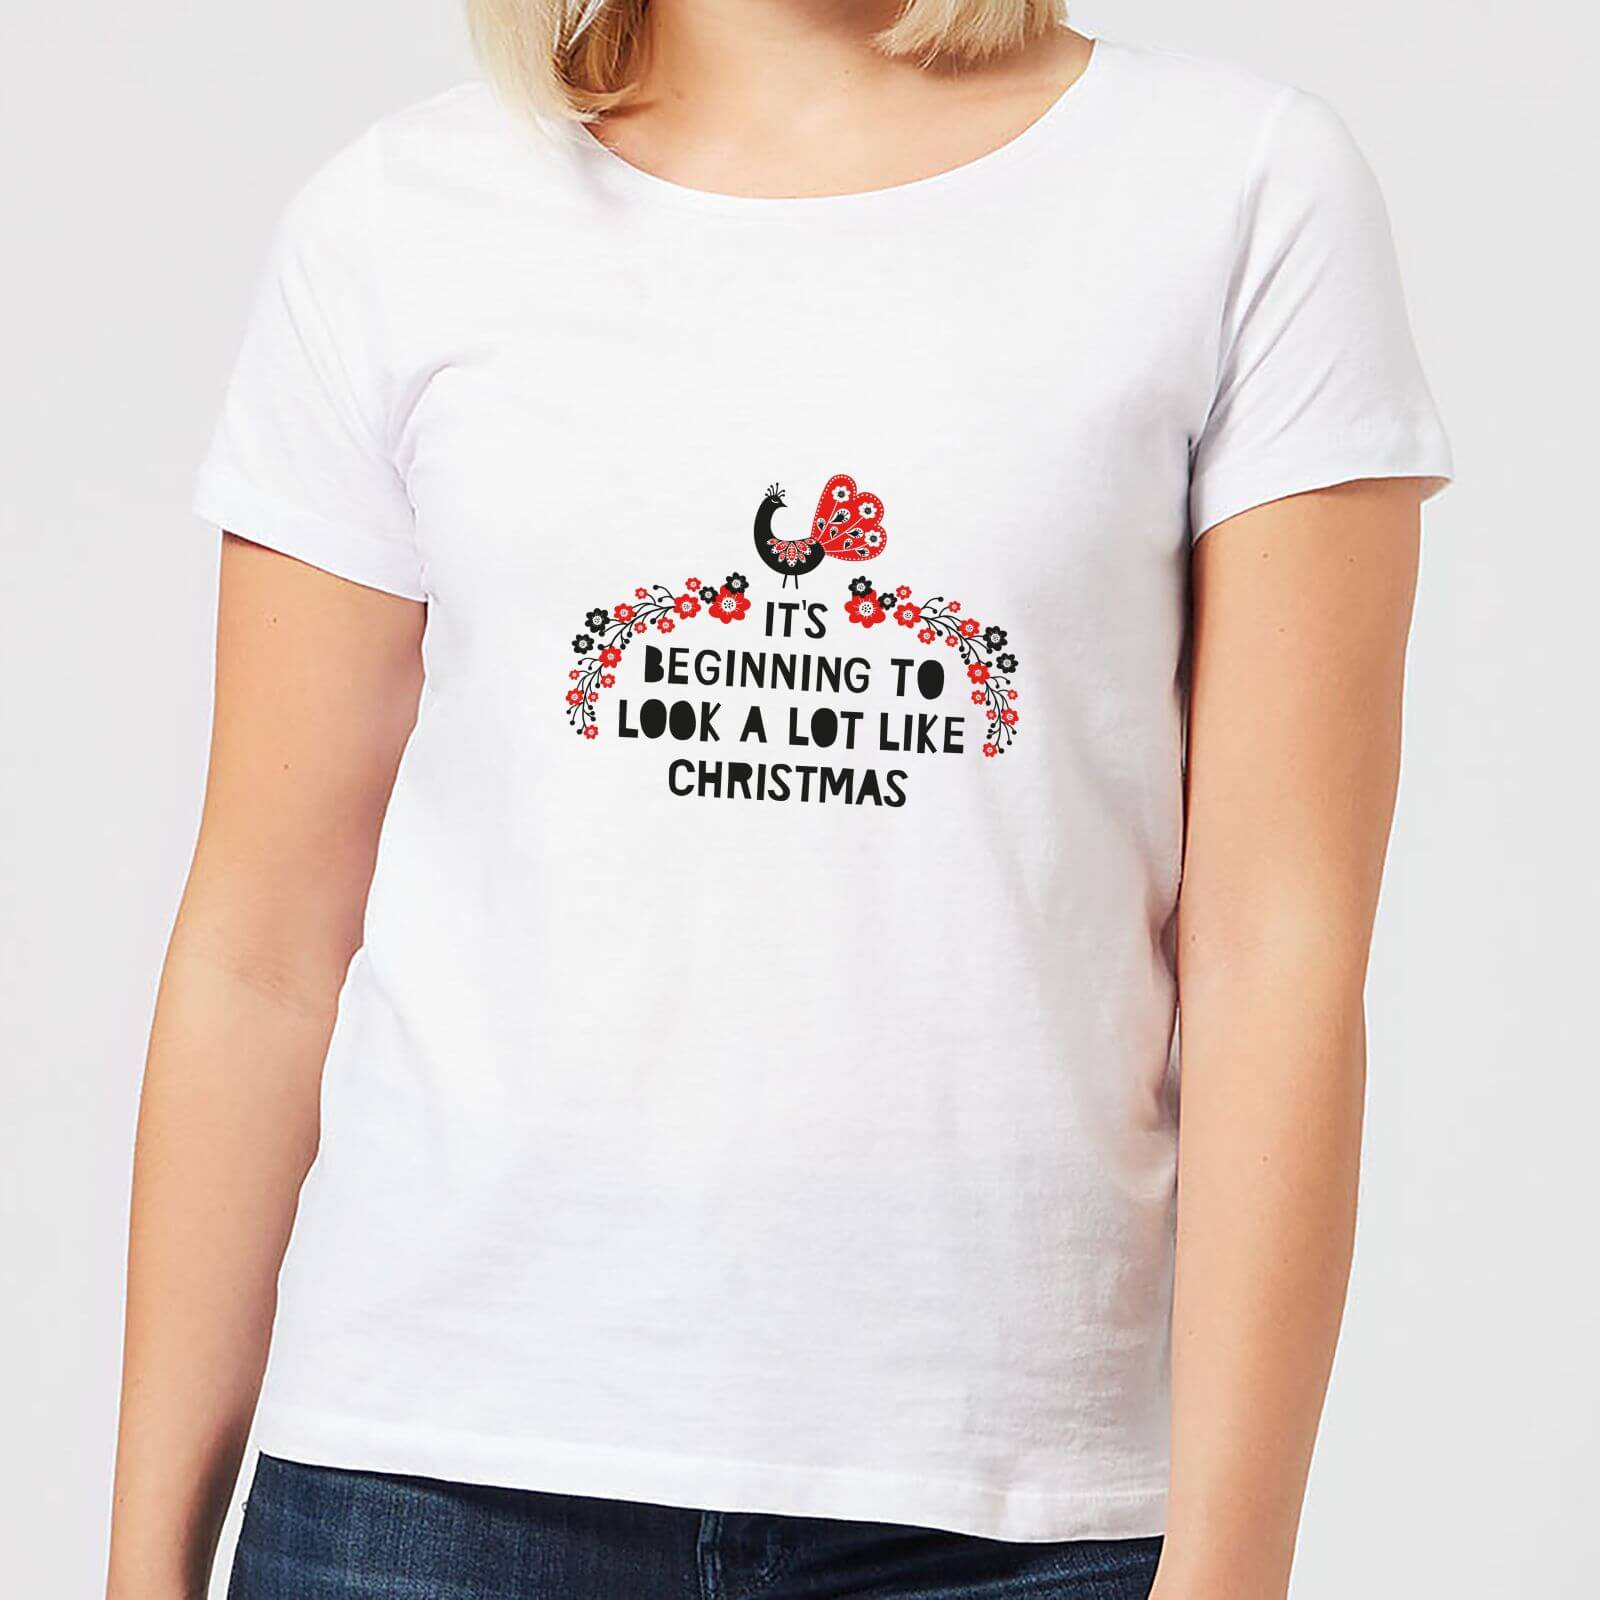 It's Beginning To Look A Lot Like Christmas Women's T-Shirt - White - L - White